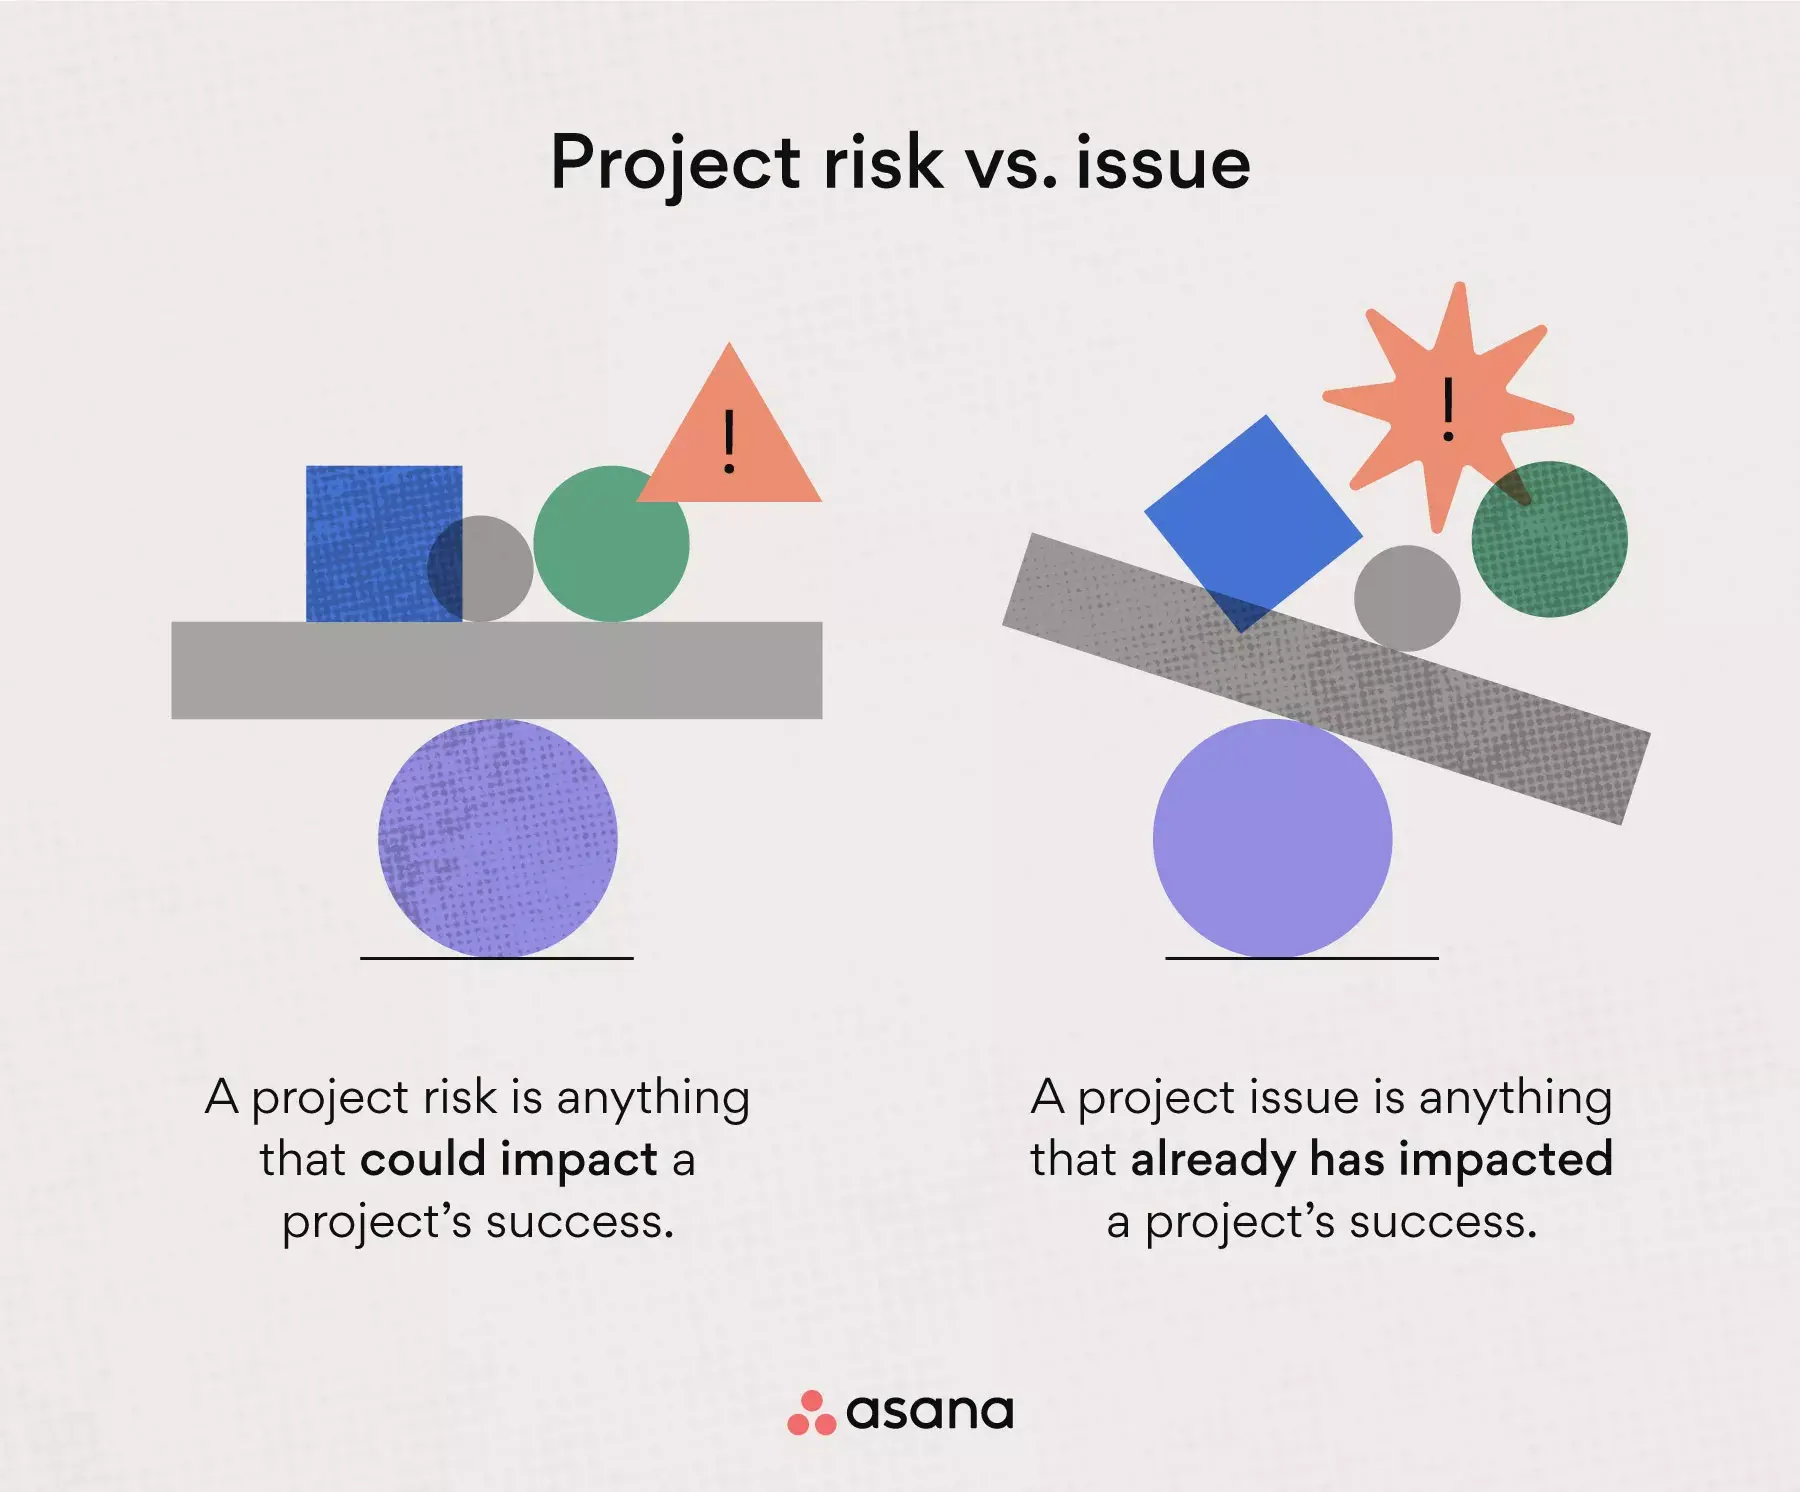 Project risk vs. issue in project management